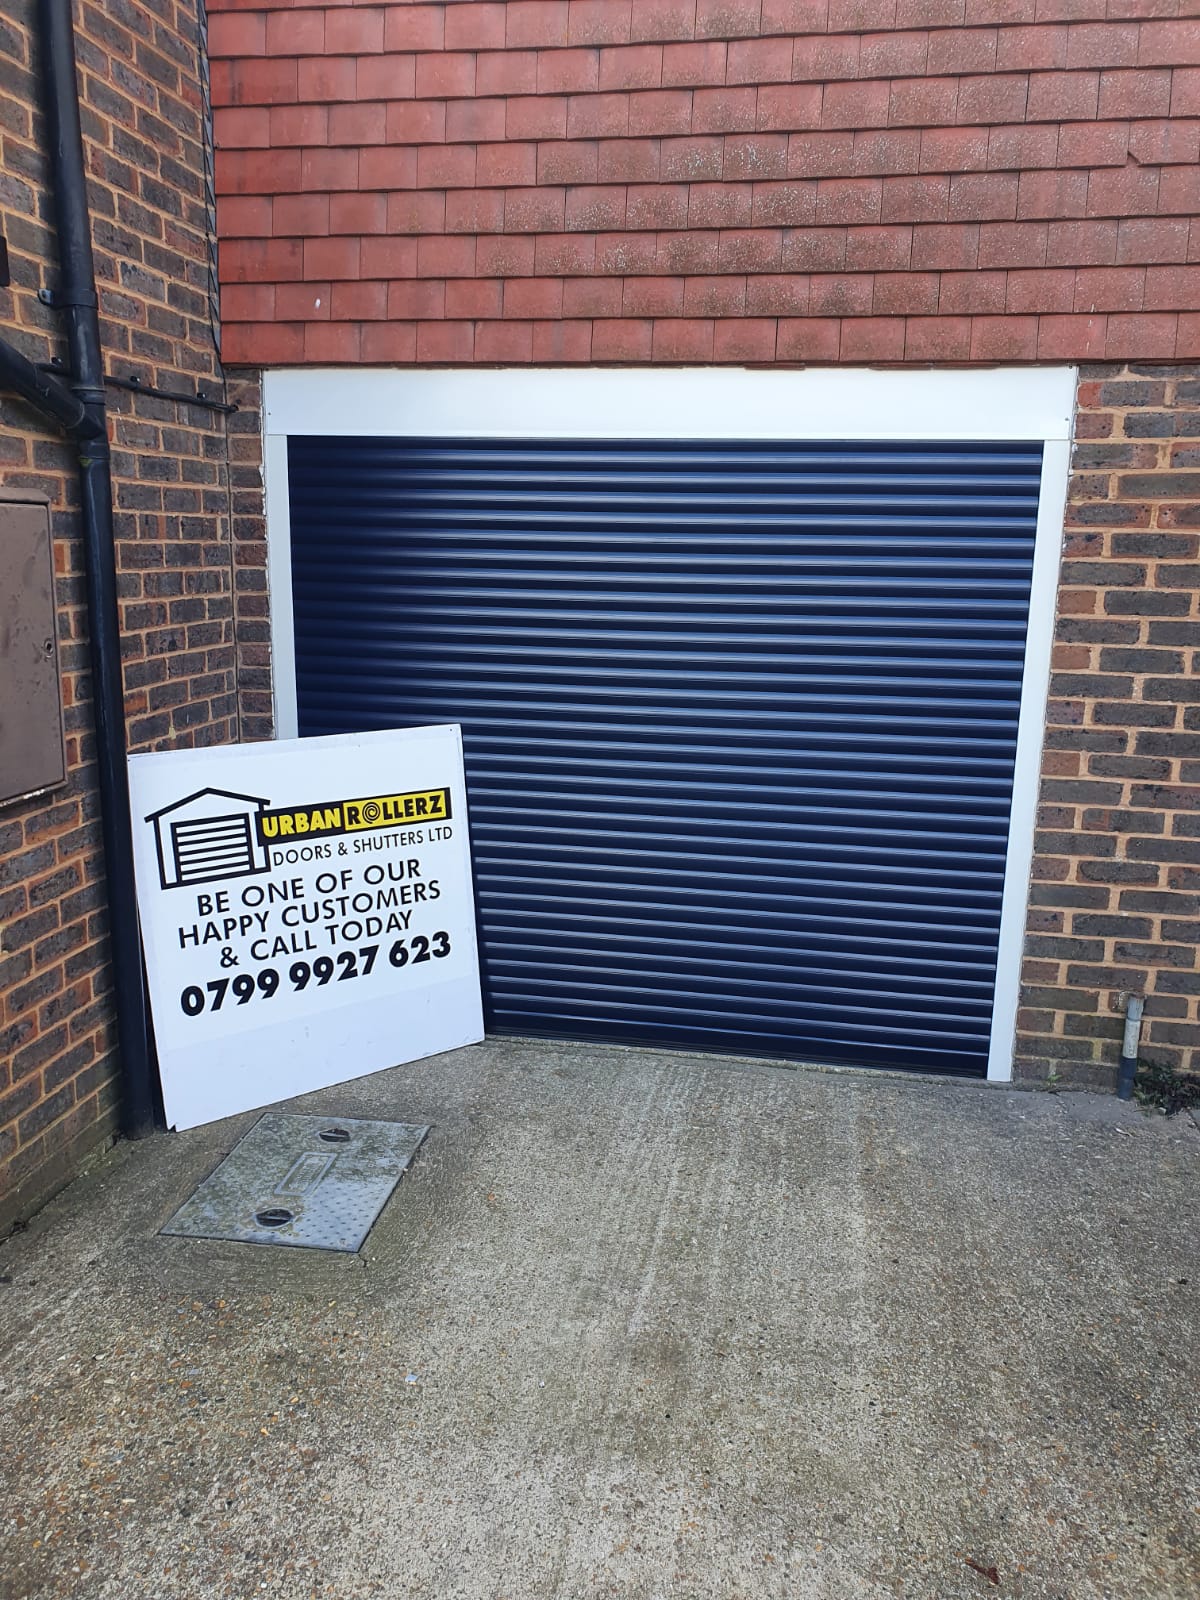 Blue Roller Shutter fitted in brick wall